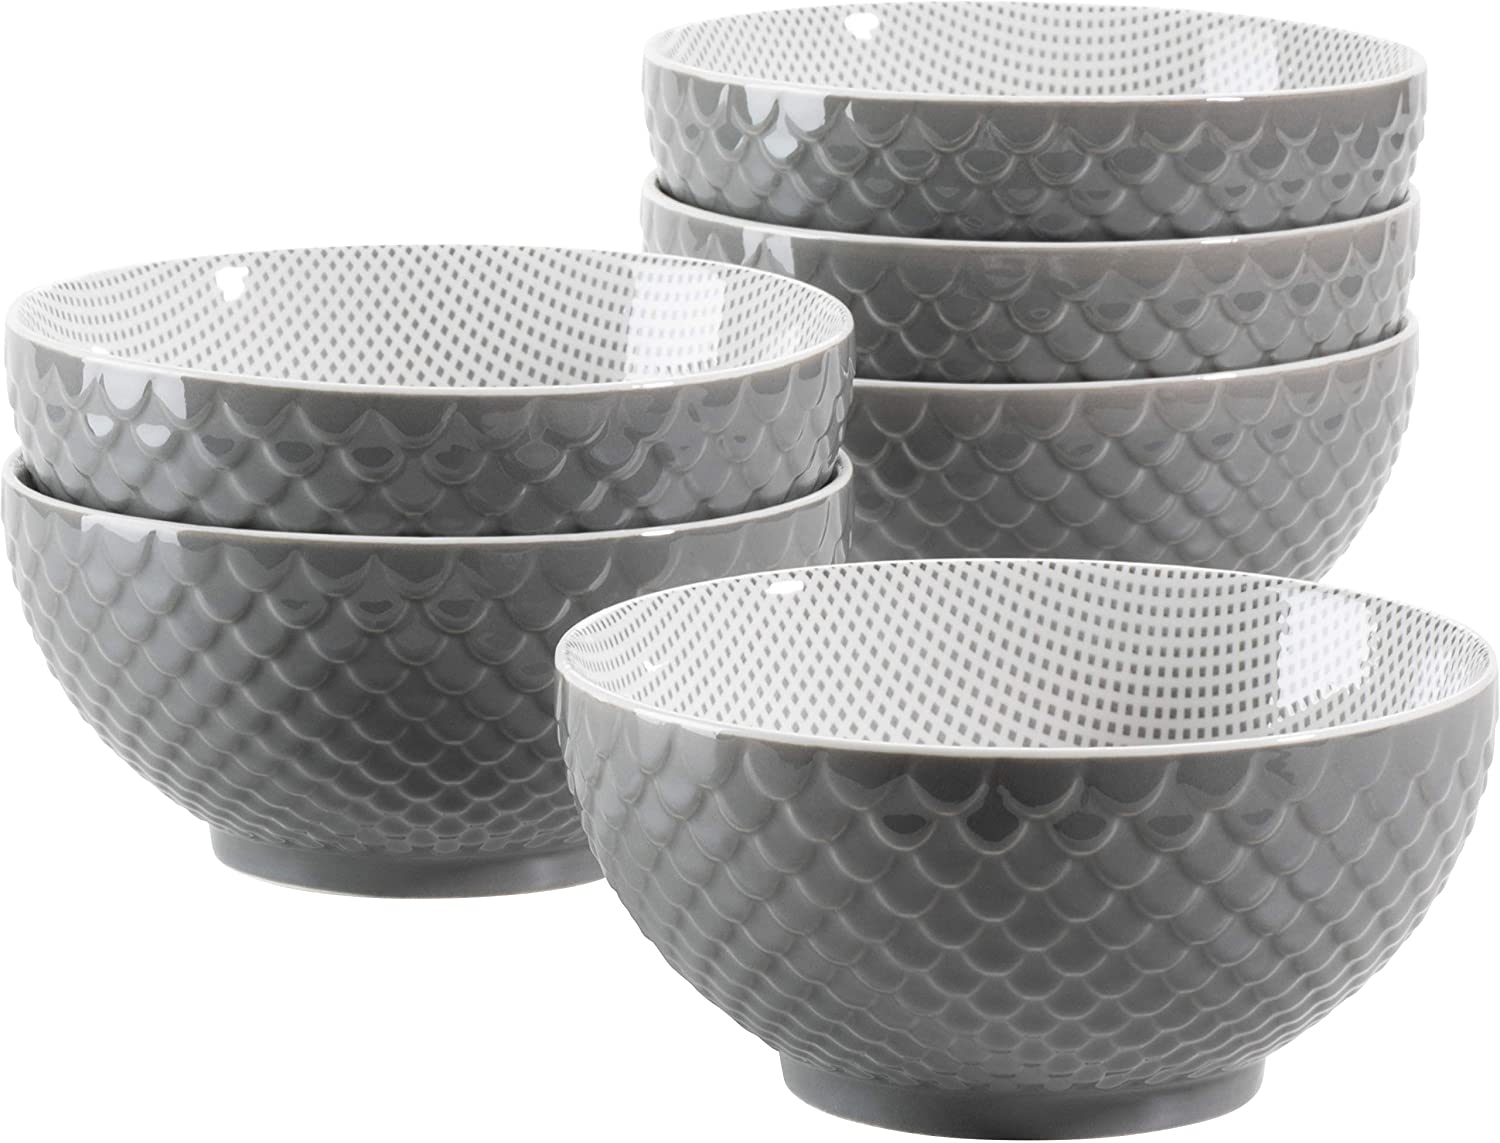 MÄSER 931575 Telde Series Cereal Bowls Set in Catering Quality, 6 Bowls with Pretty Relief Surface and Glazed Decoration, Durable Porcelain, Grey